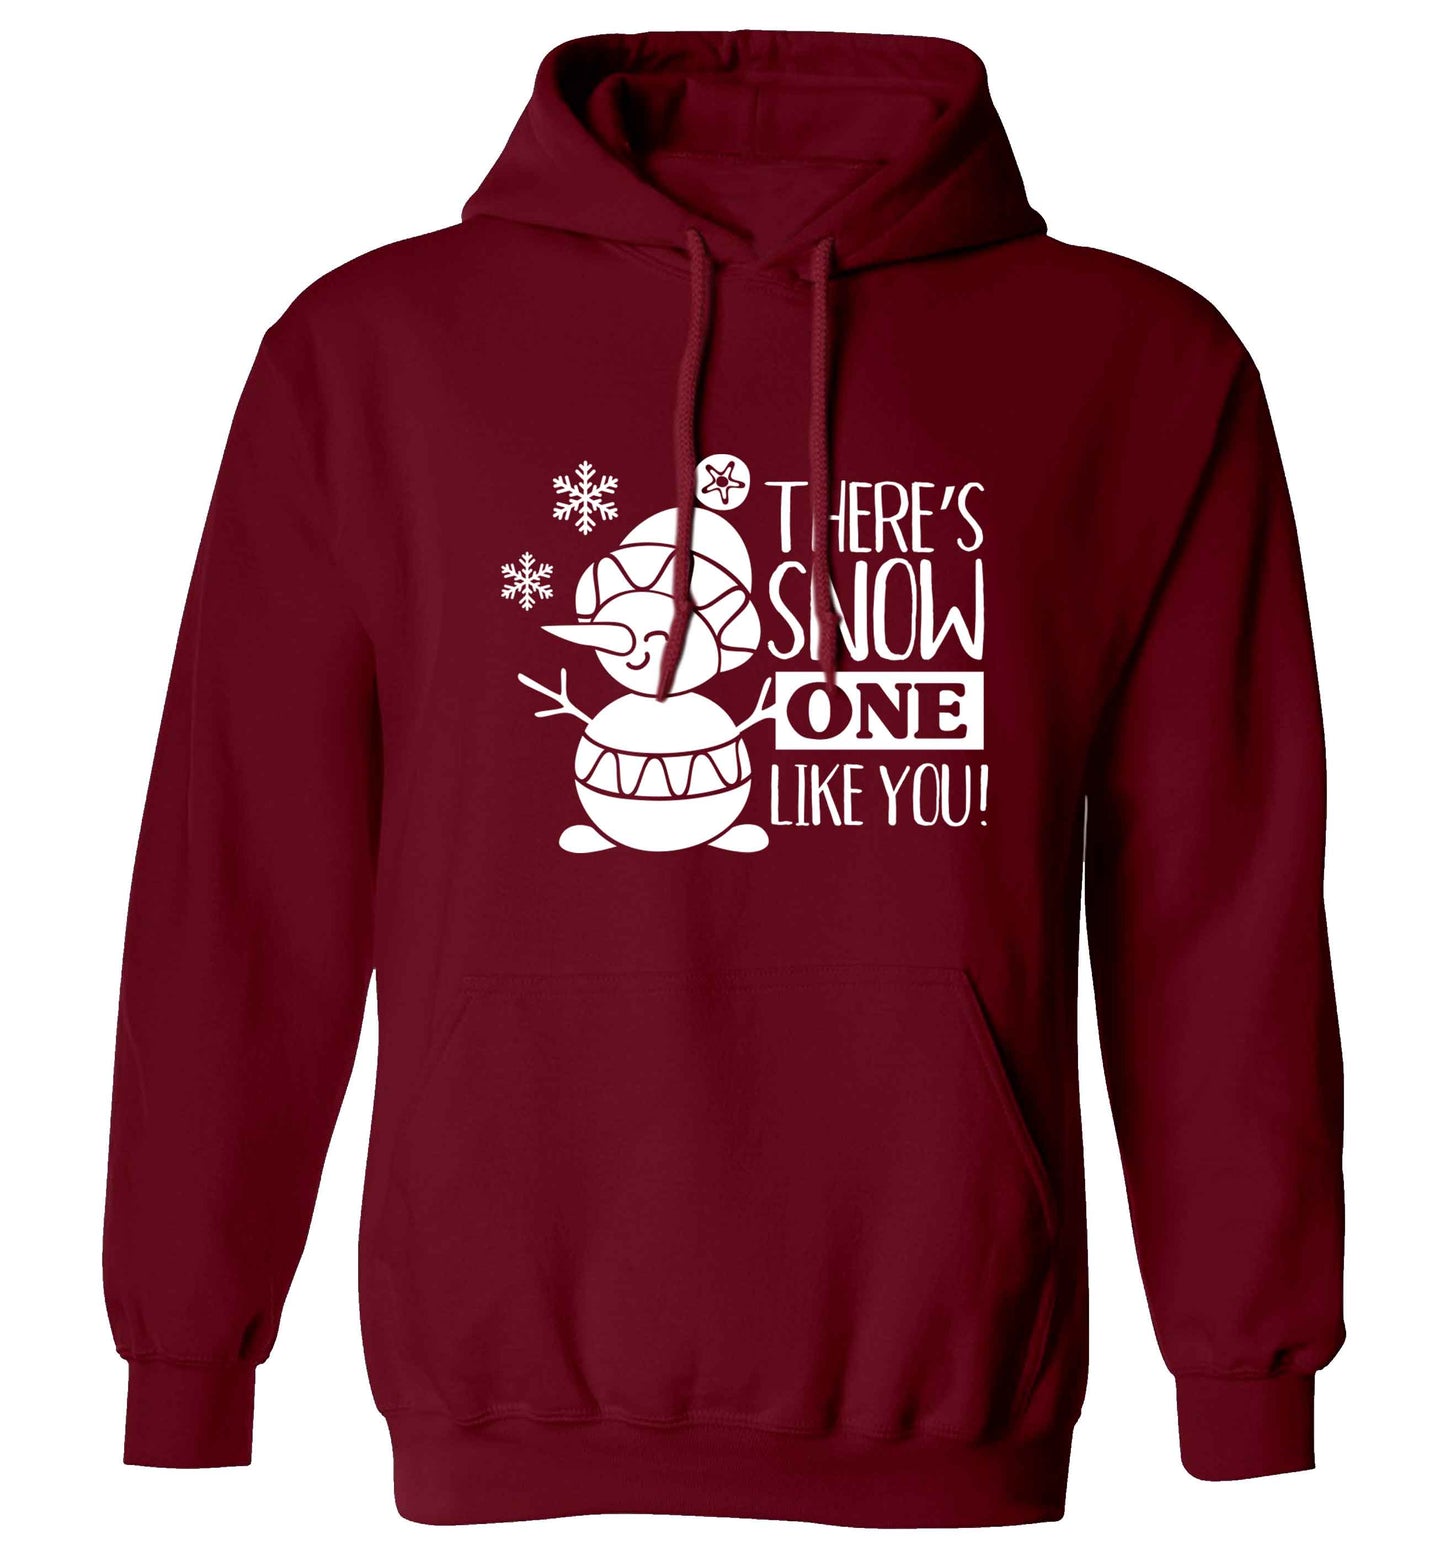 There's snow one like you adults unisex maroon hoodie 2XL